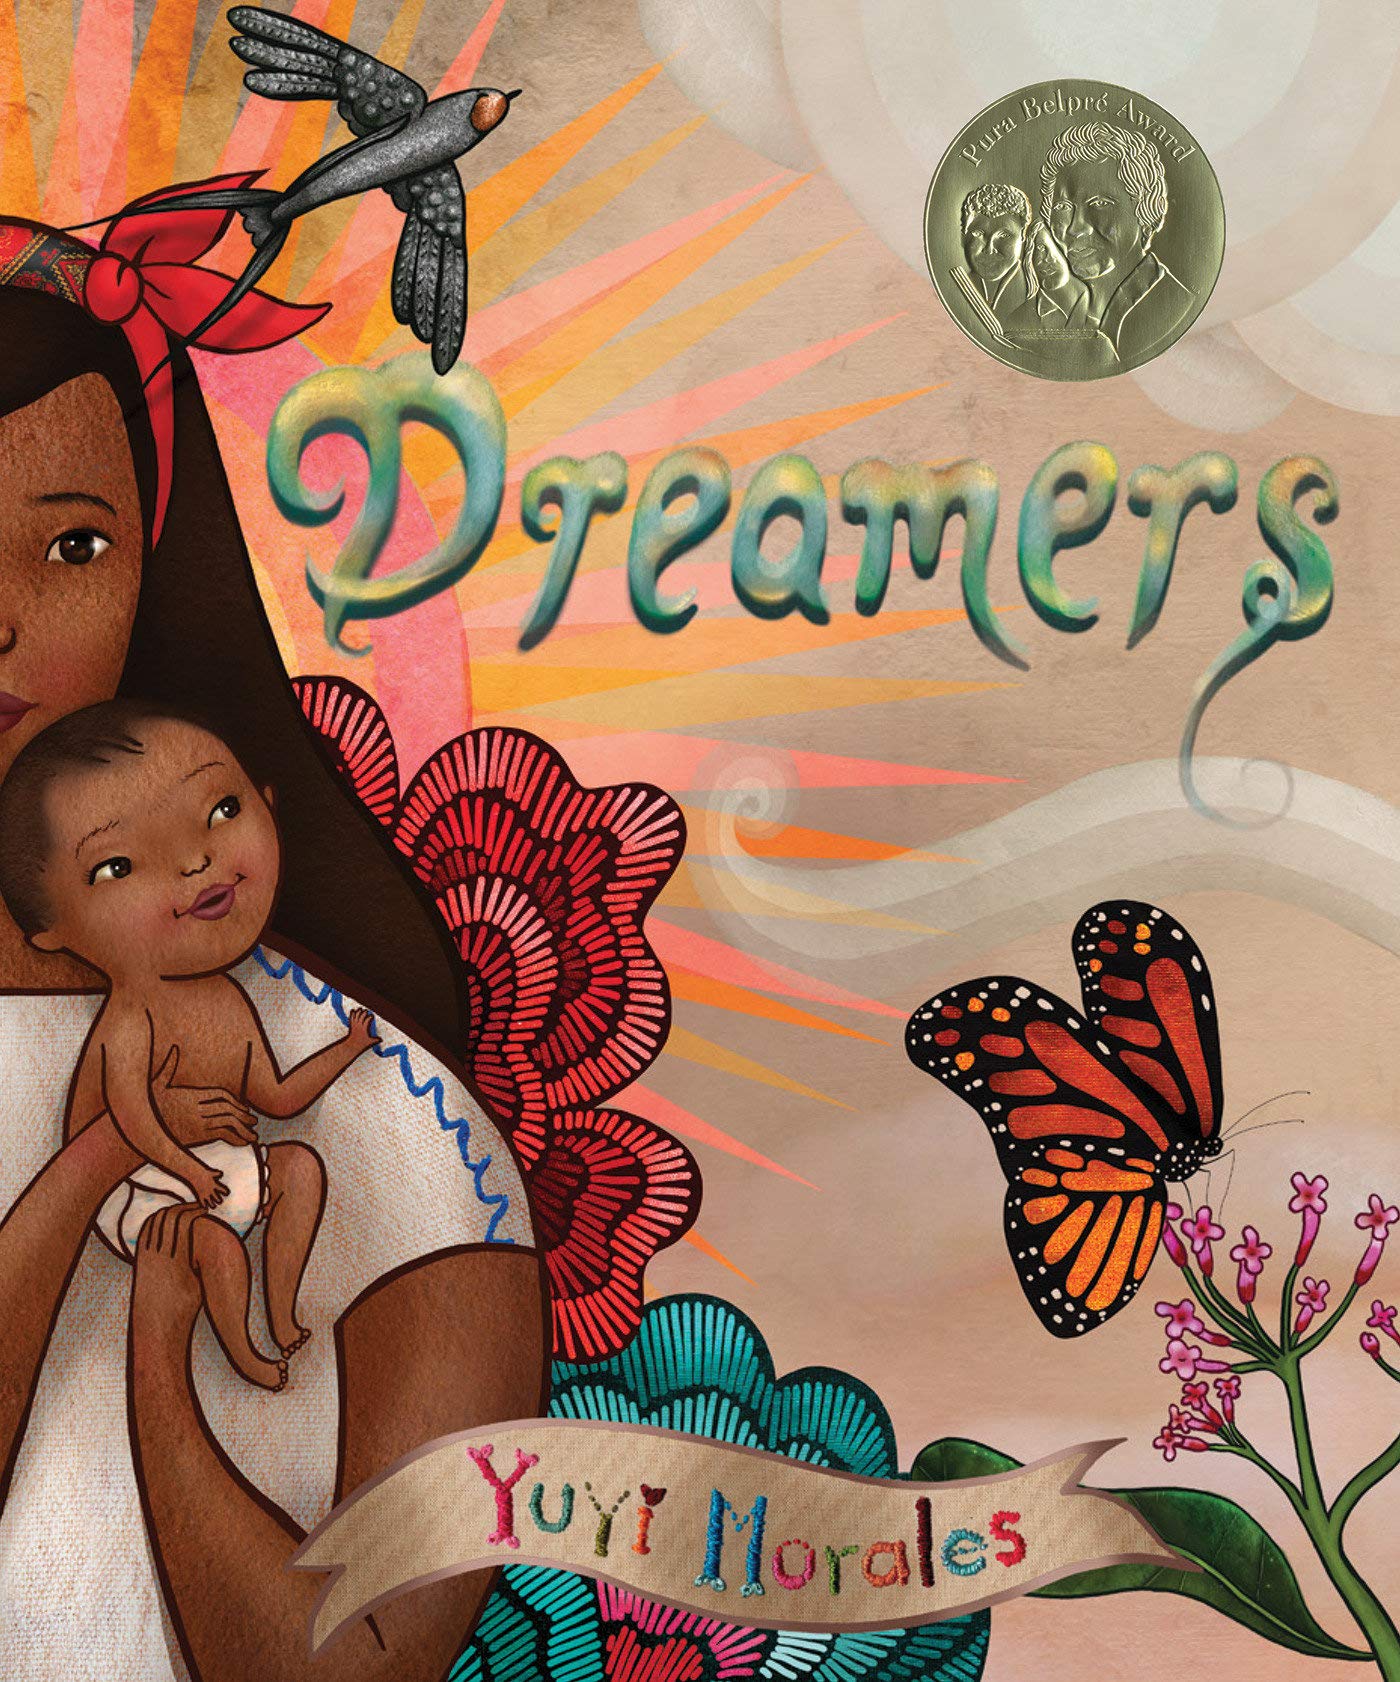 Image of book cover "Dreamers" by Yuyi Morales